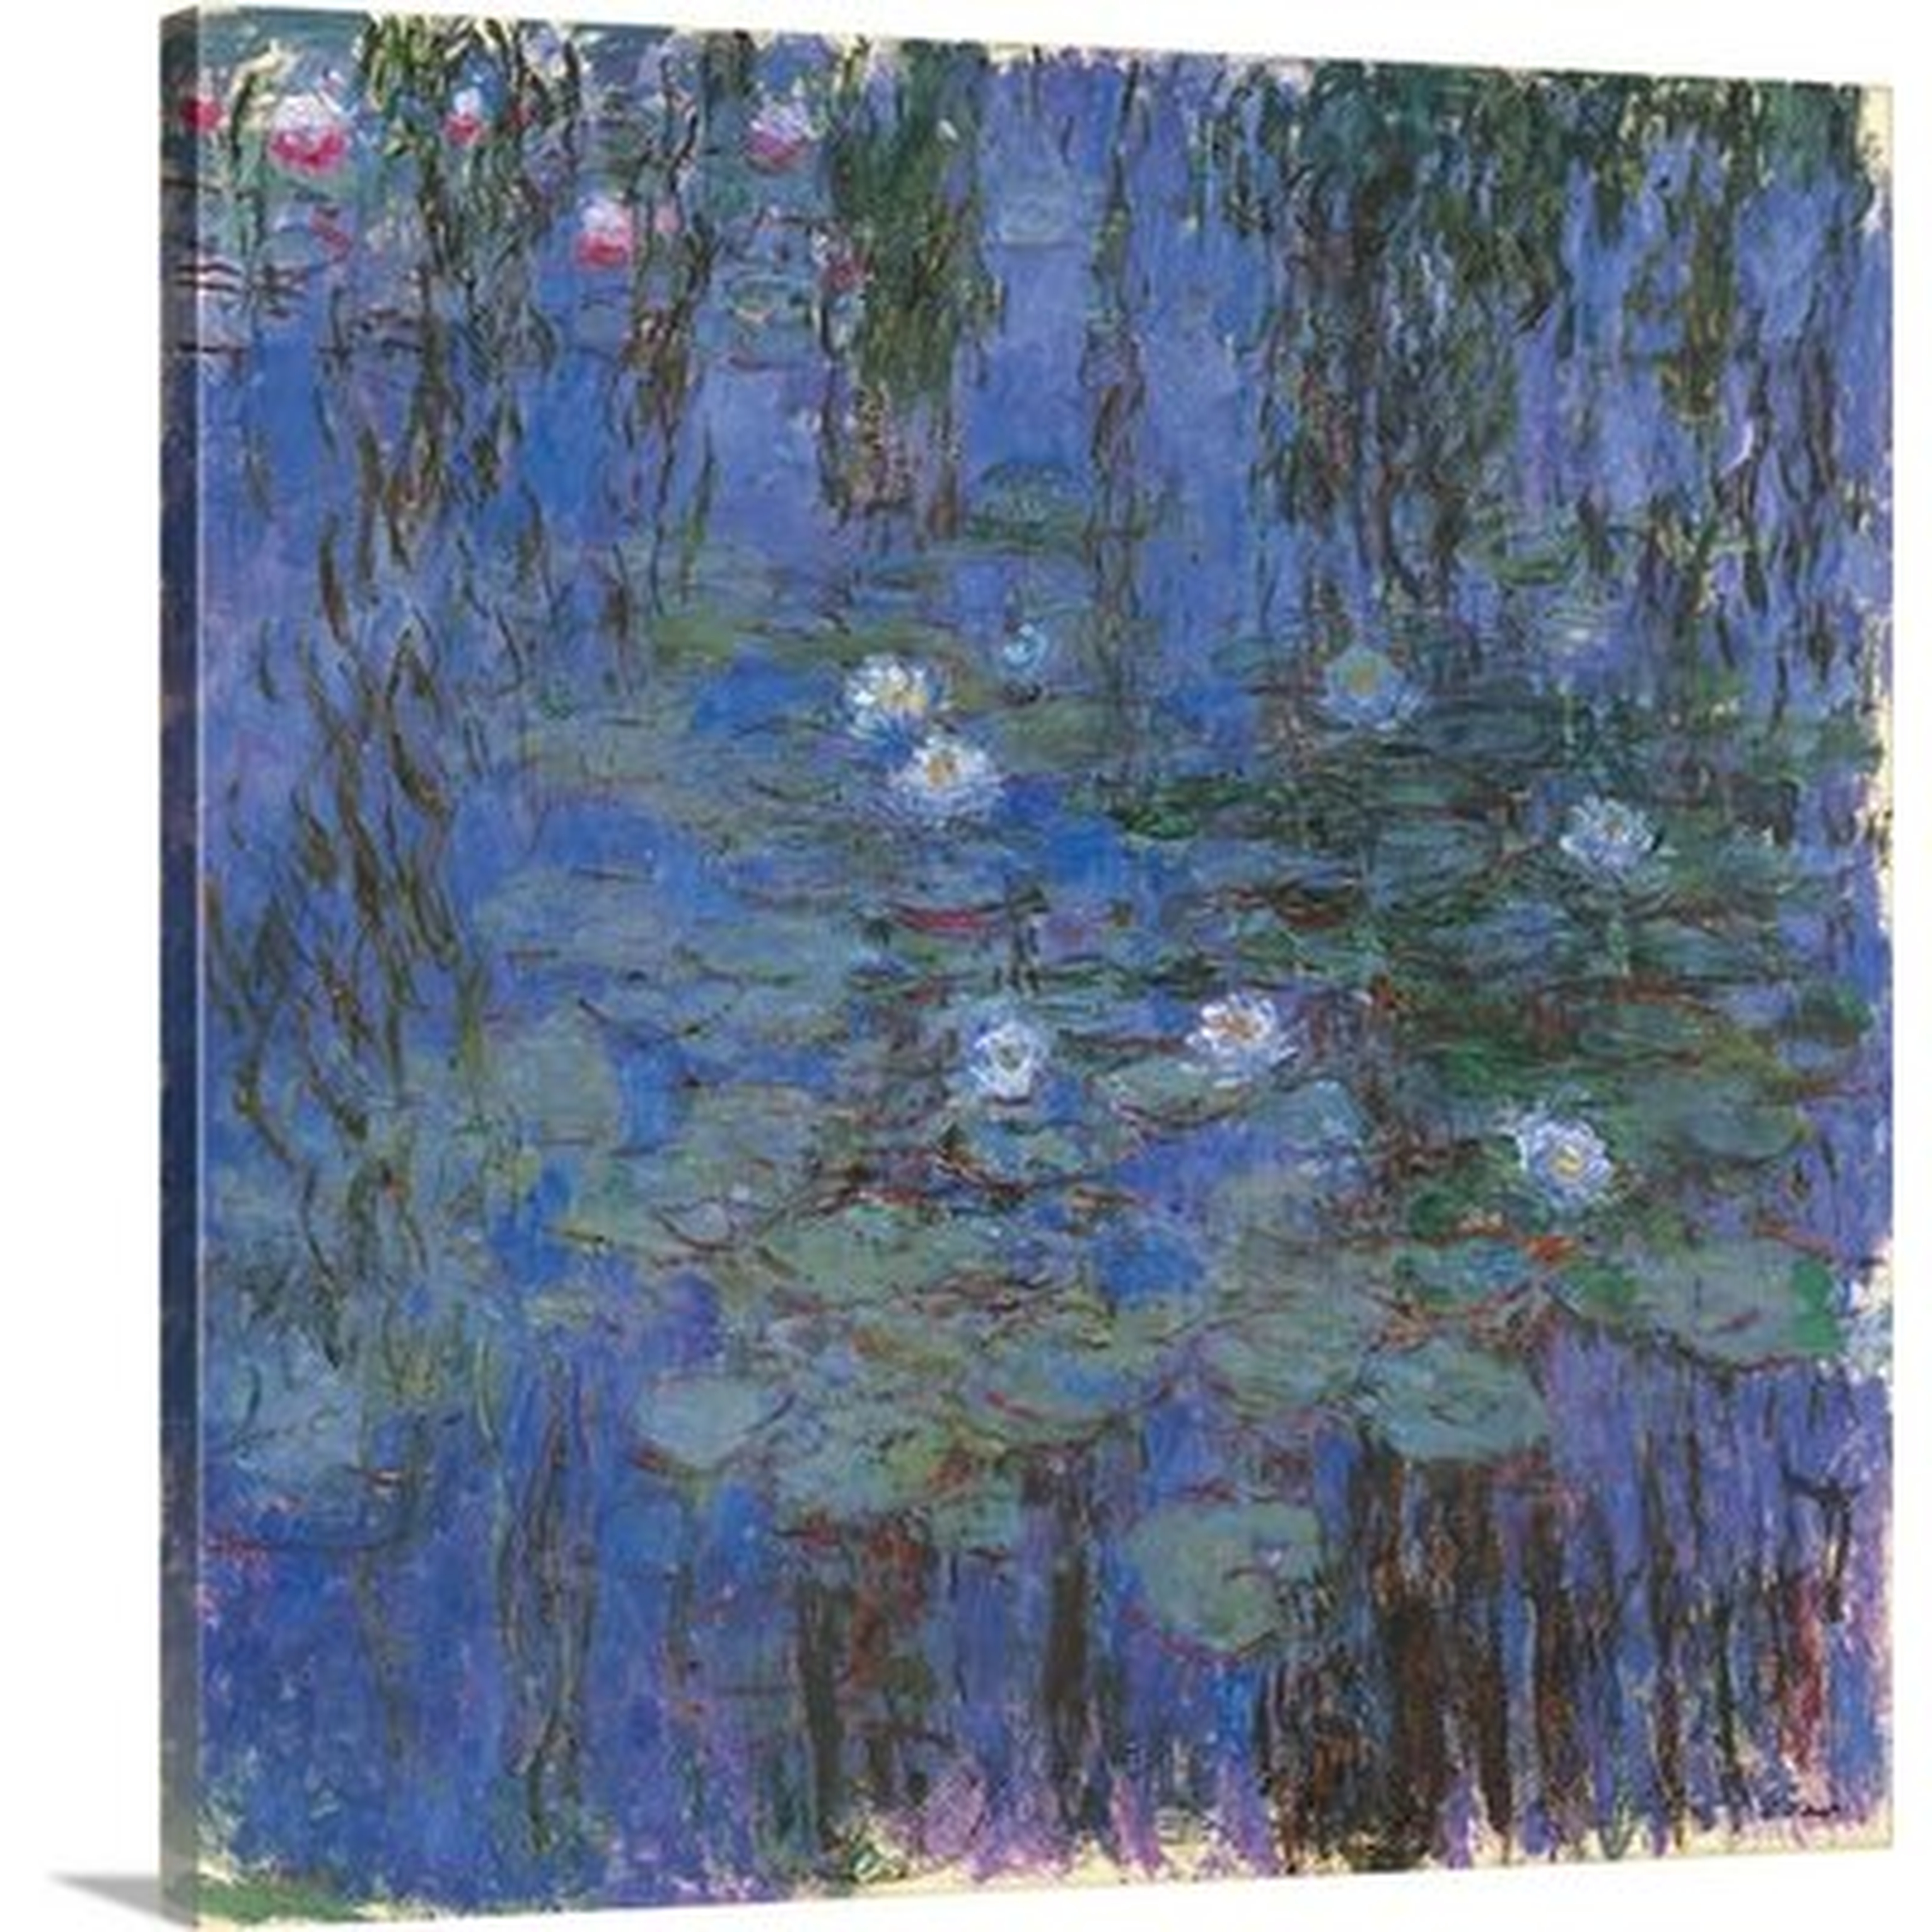 'Blue Water Lilies, 1916-1919. Musee d'Orsay, Paris, France' by Claude Monet Painting Print - Wayfair